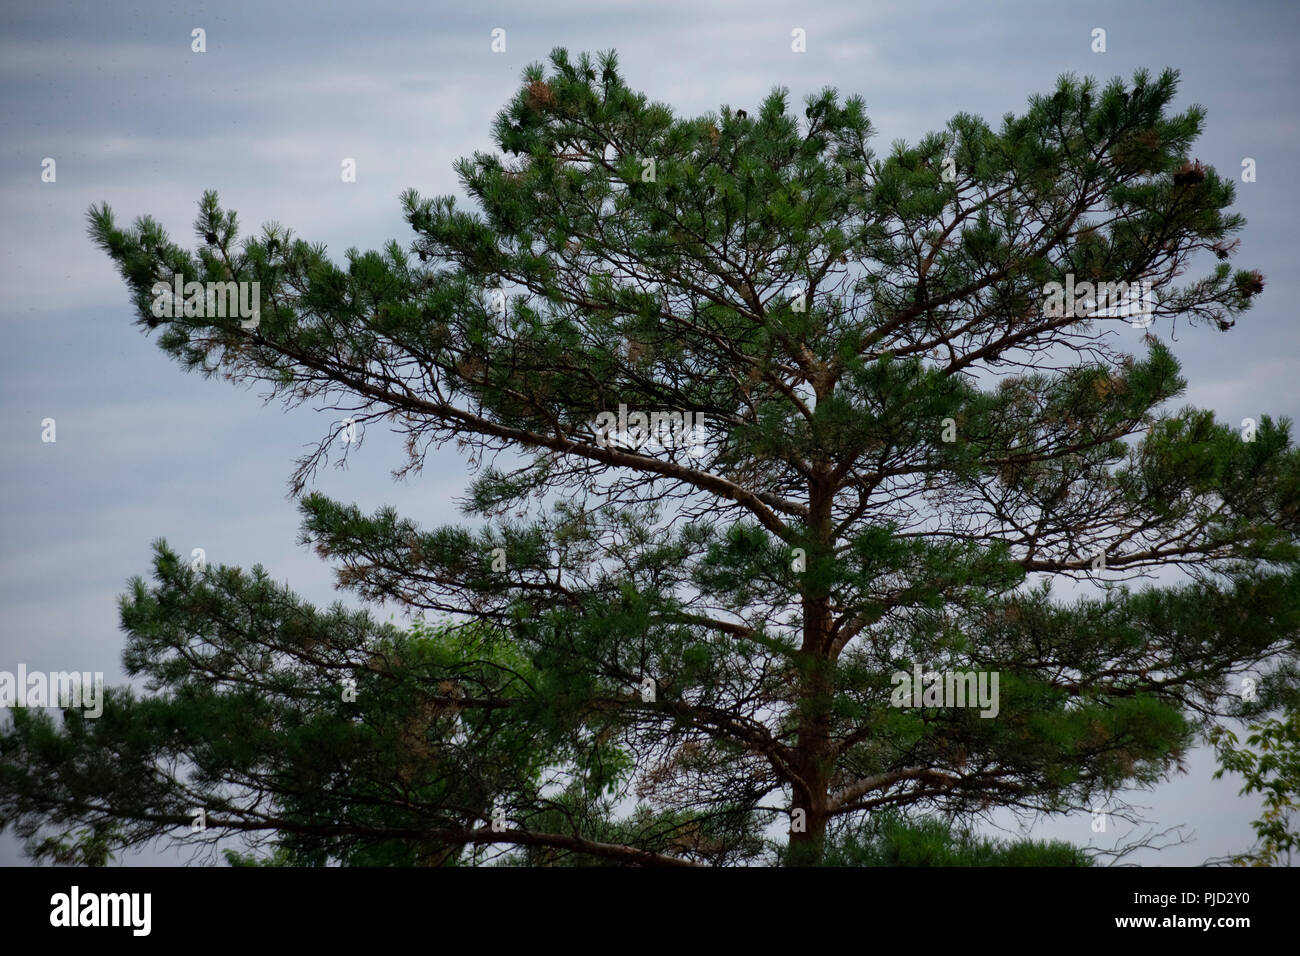 low angle view of evergreen tree against a cloudy sky Stock Photo